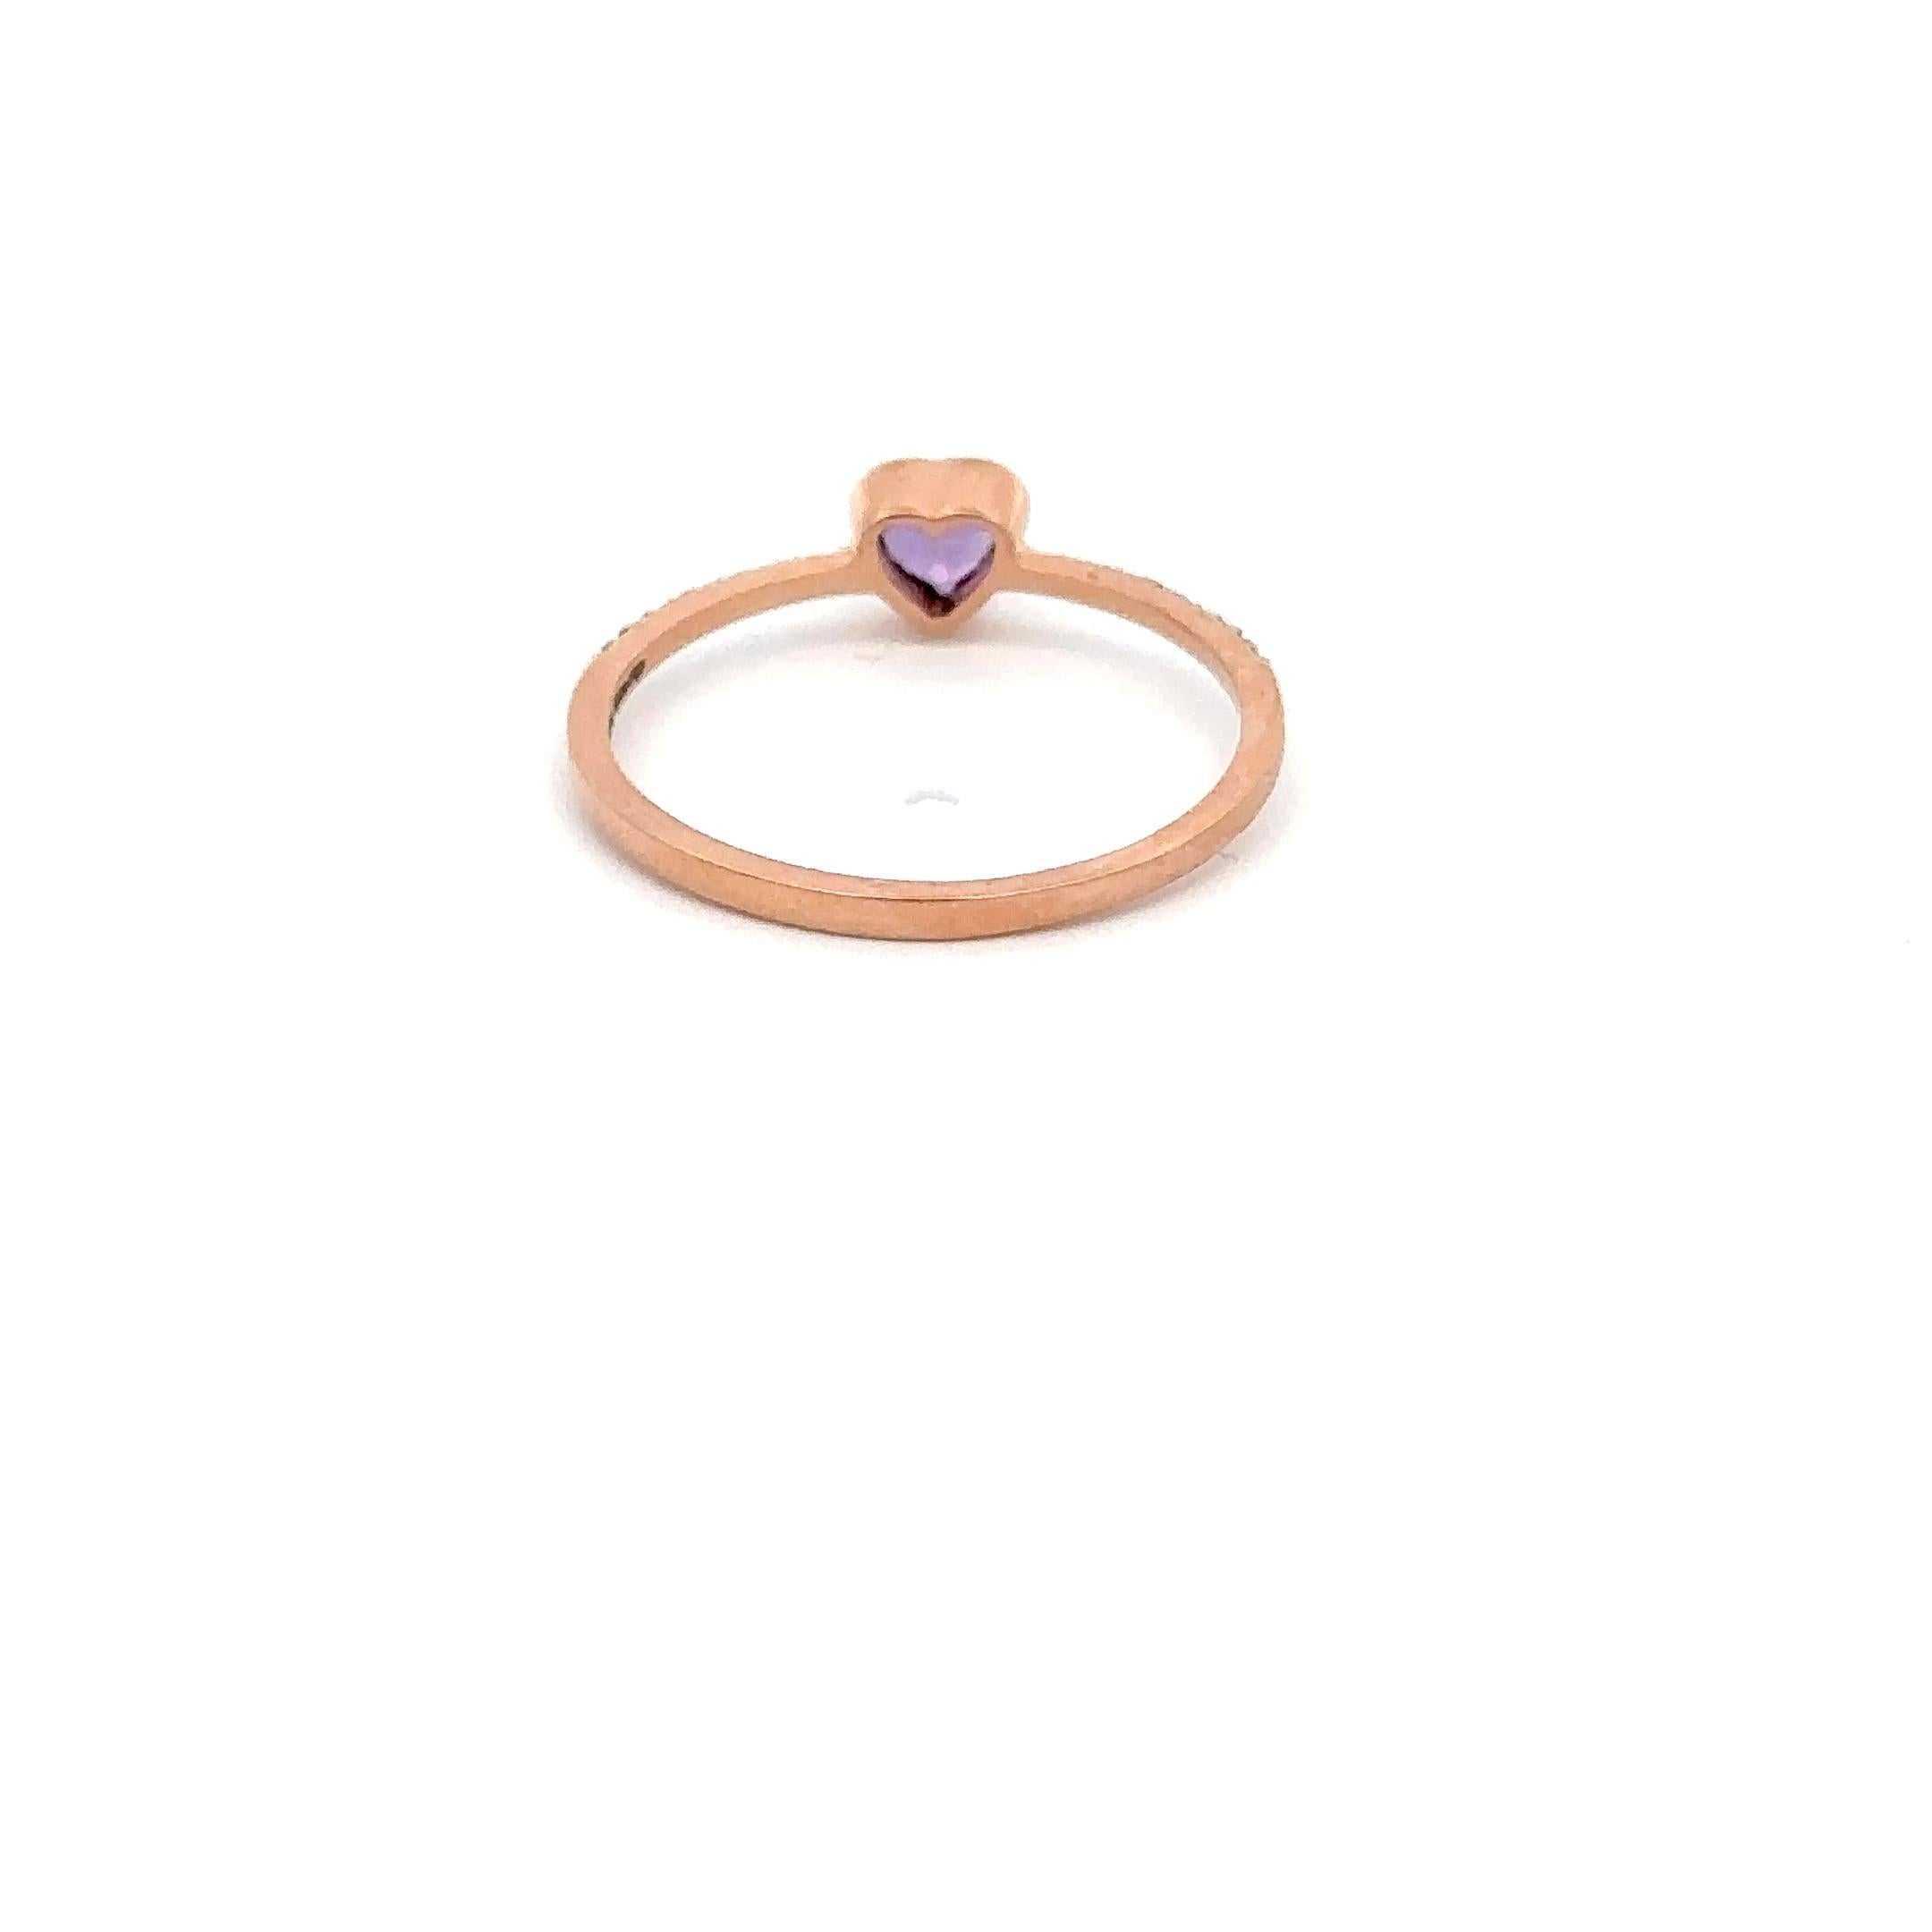 For Sale:  Dainty Heart Shaped Amethyst And Diamonds 14k Rose Gold Stackable Ring 5